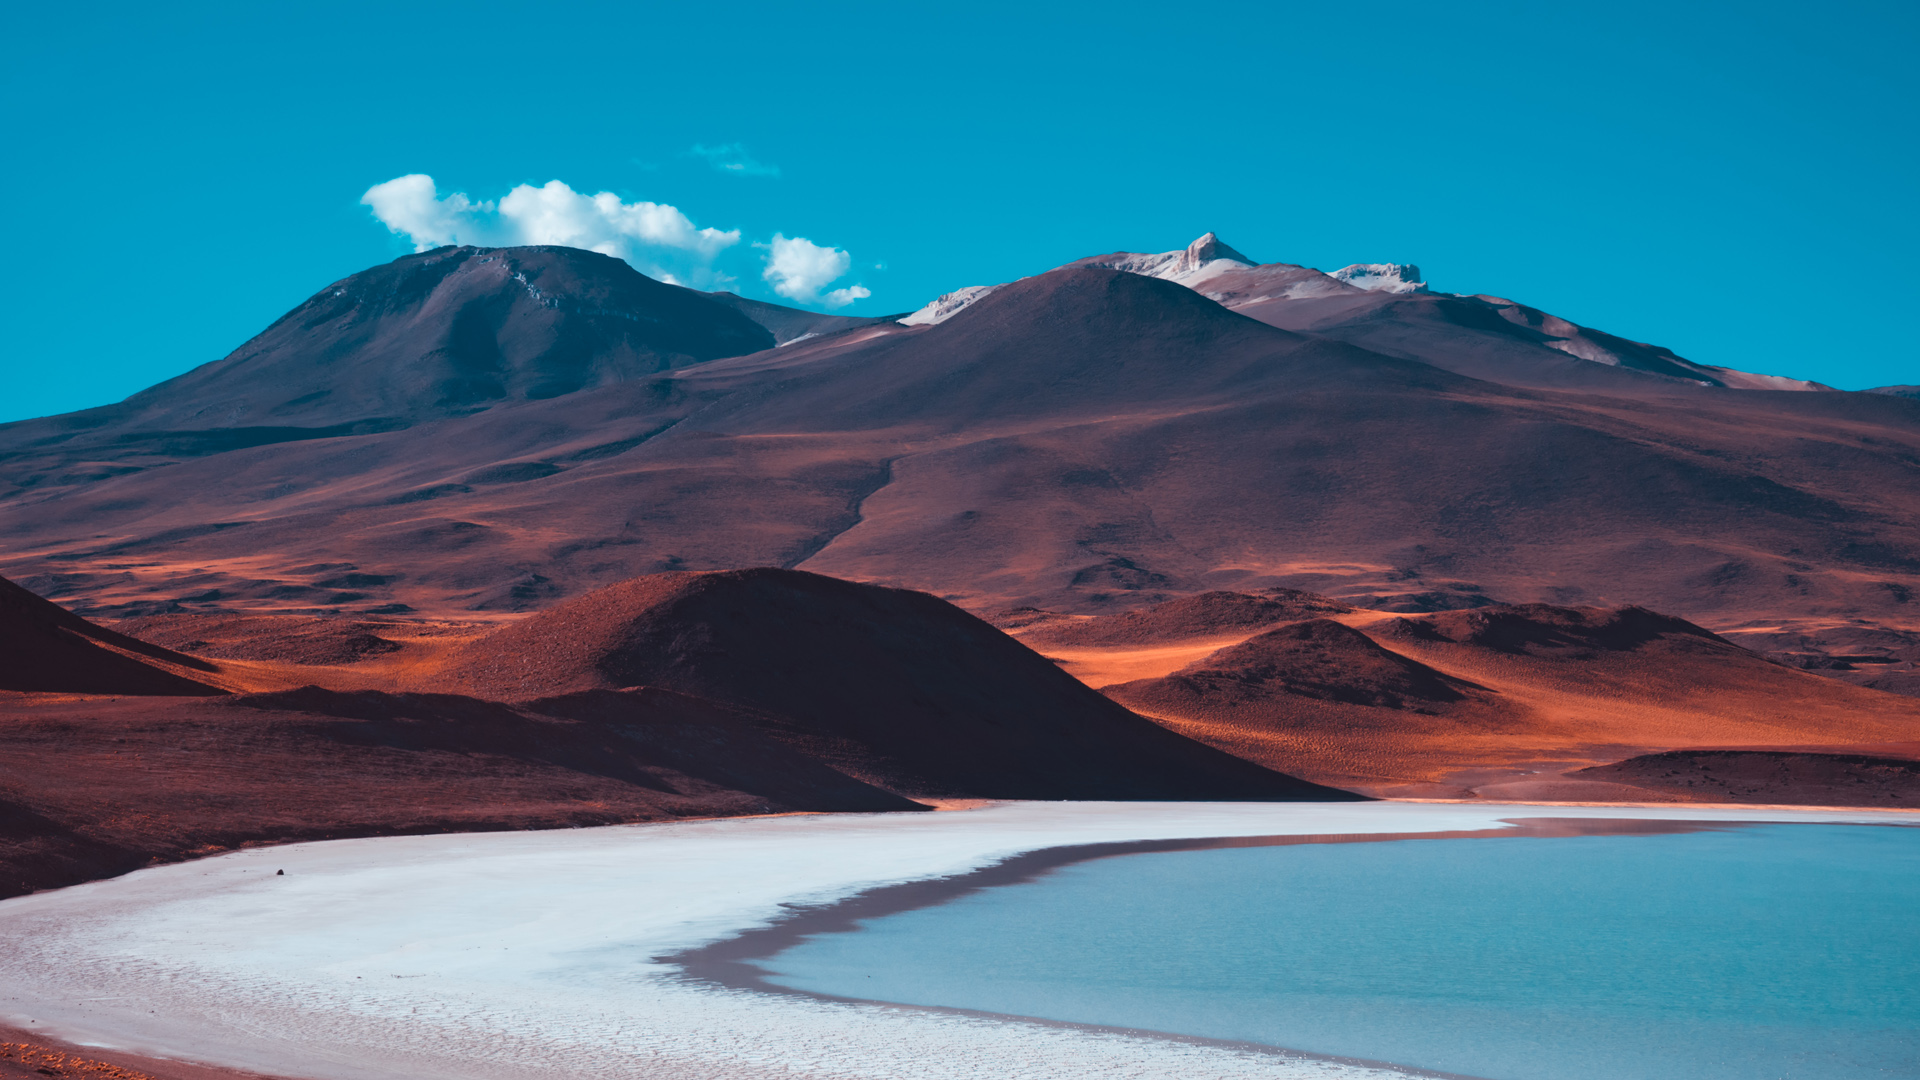 Red volcanic mountains and a blue salt lake in desert, San Pedro de ...